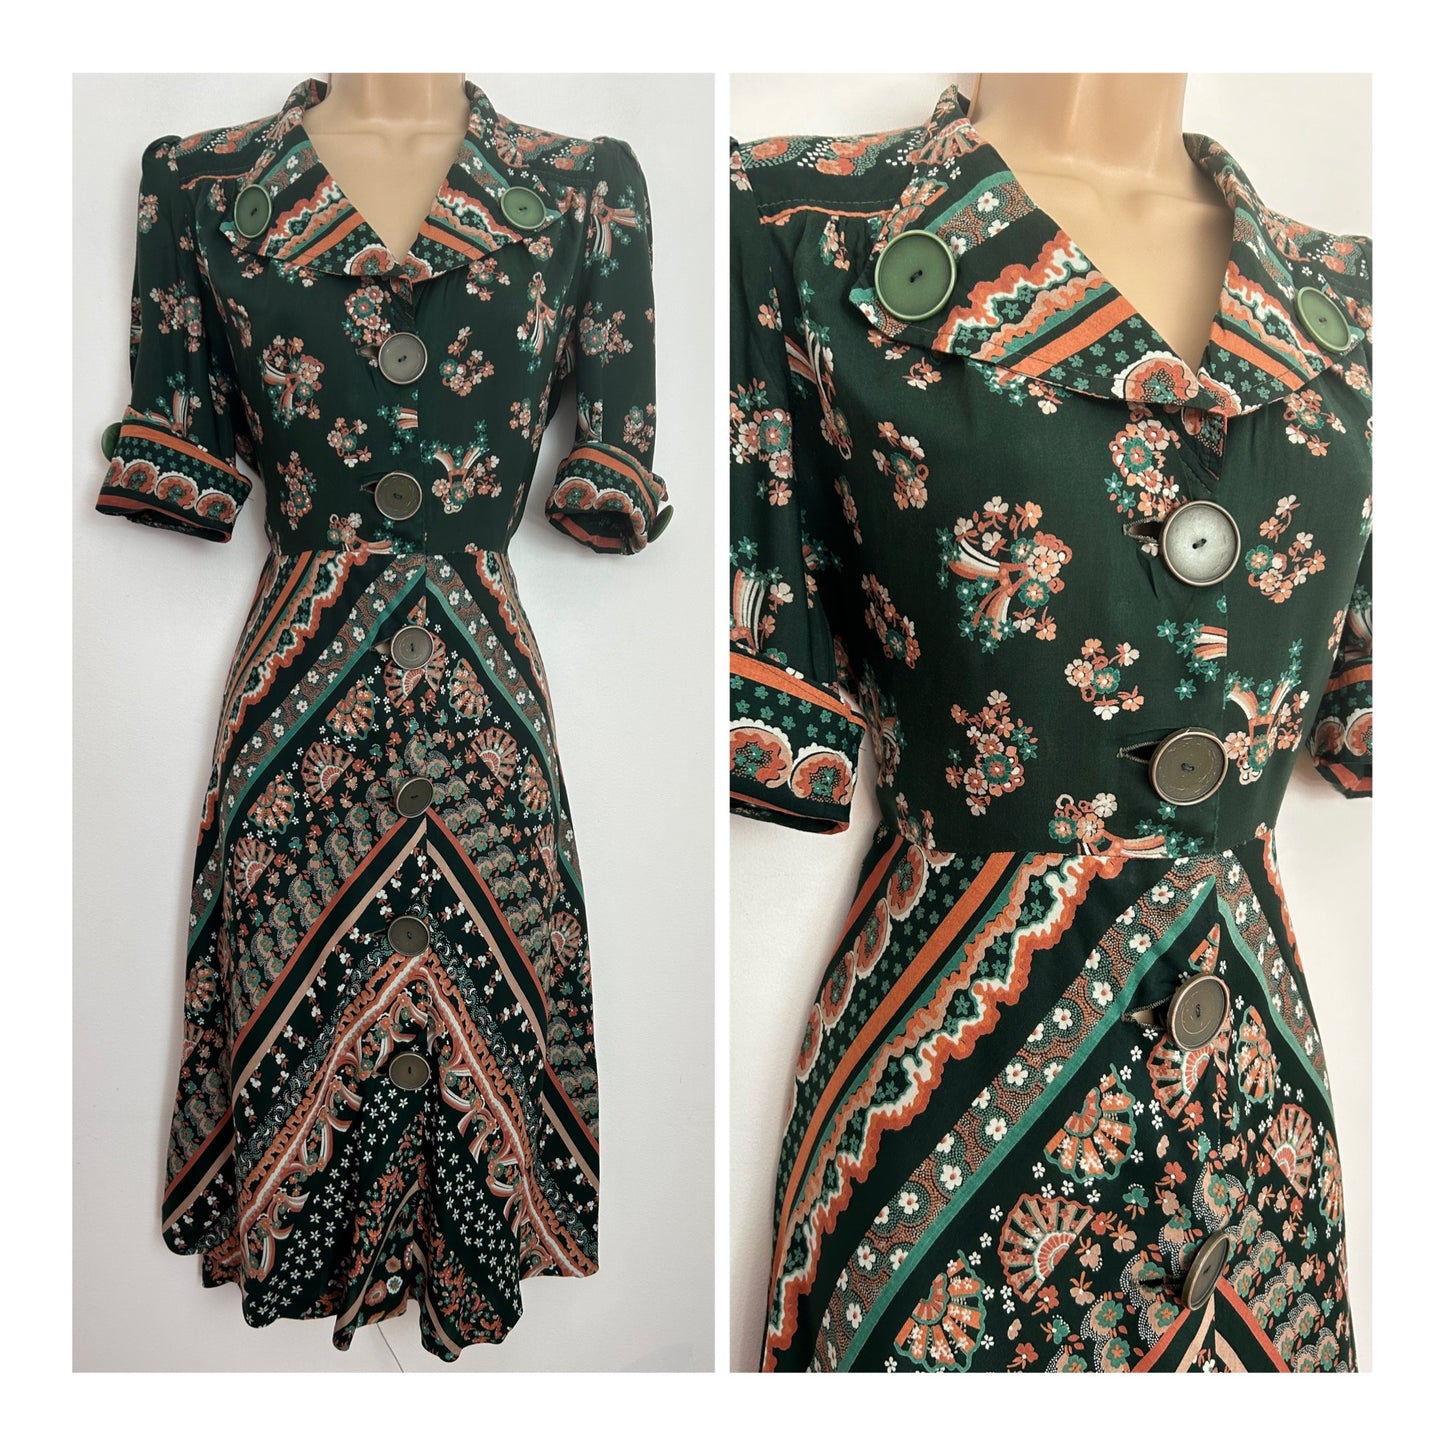 Vintage 1970s LOUIS CARING UK Size 10 Dark Green & Terracotta Floral Print Chunky Button Detail Fit & Flare Dress